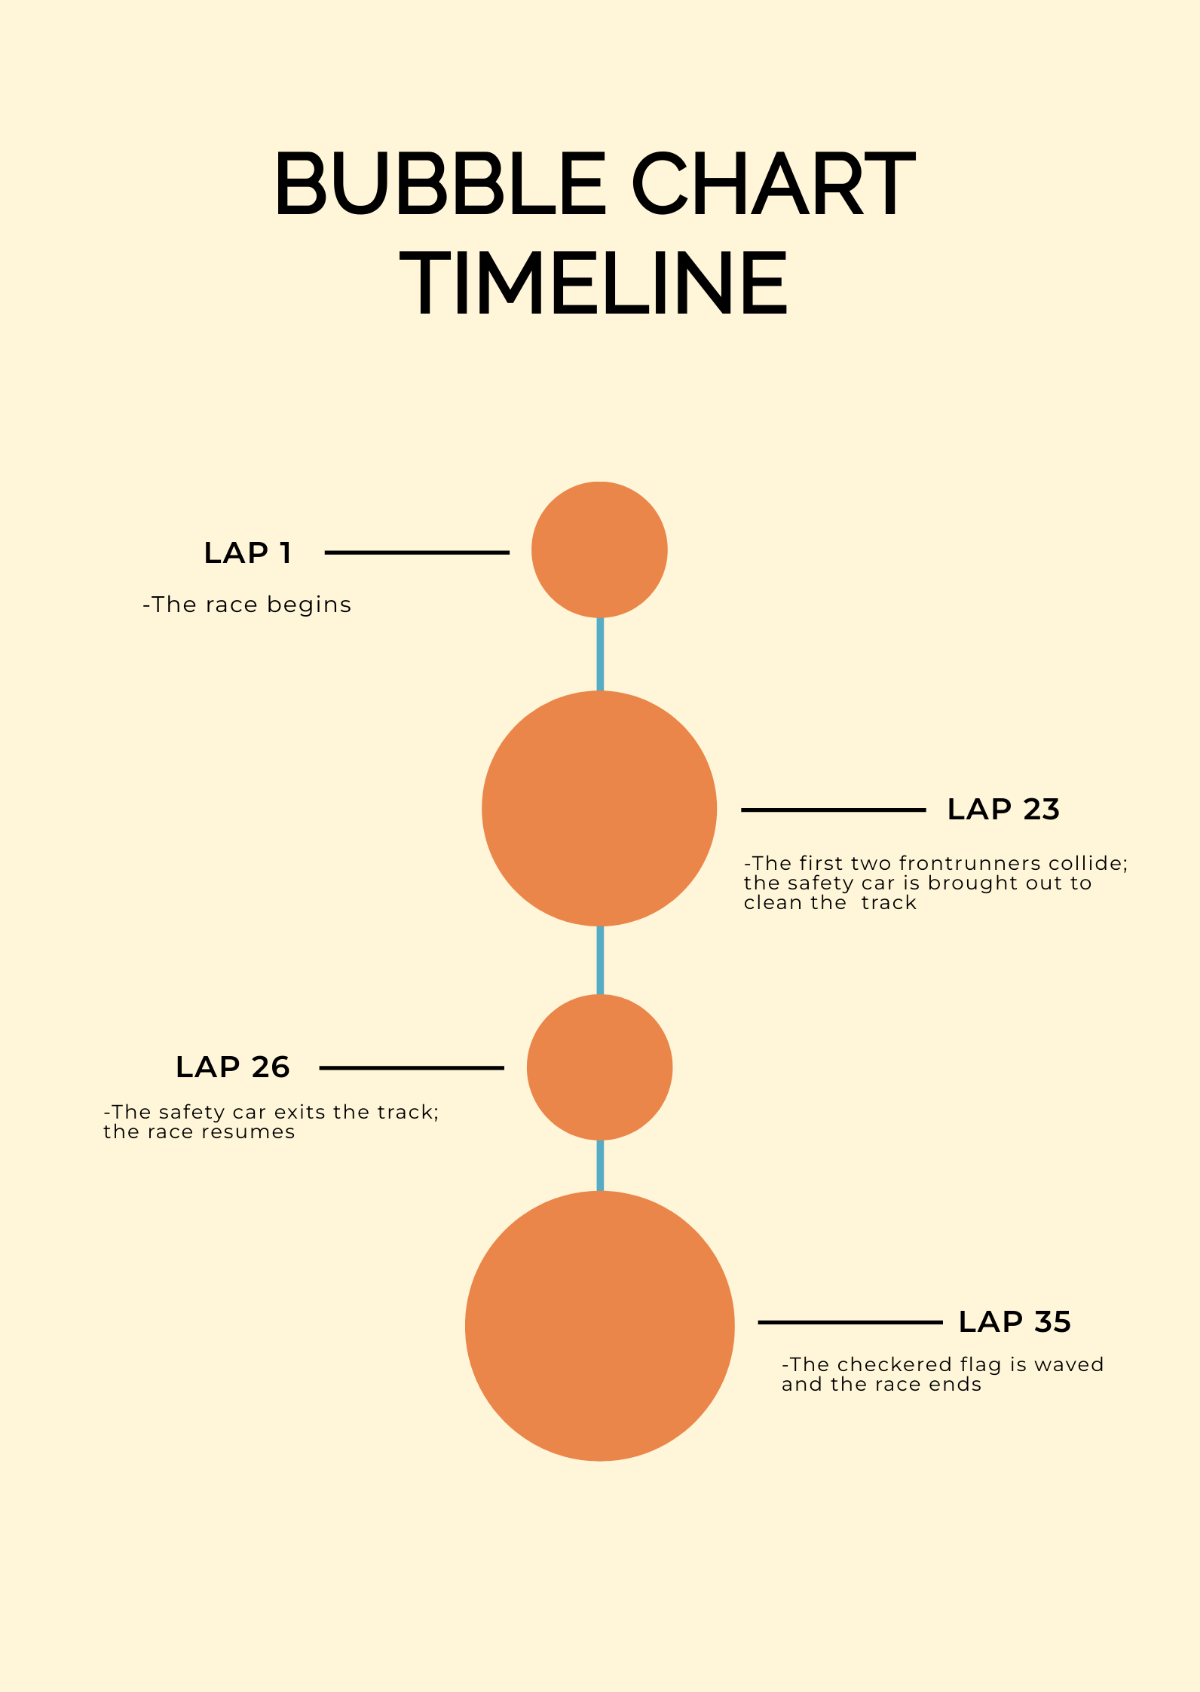 Free Bubble Chart Timeline Template